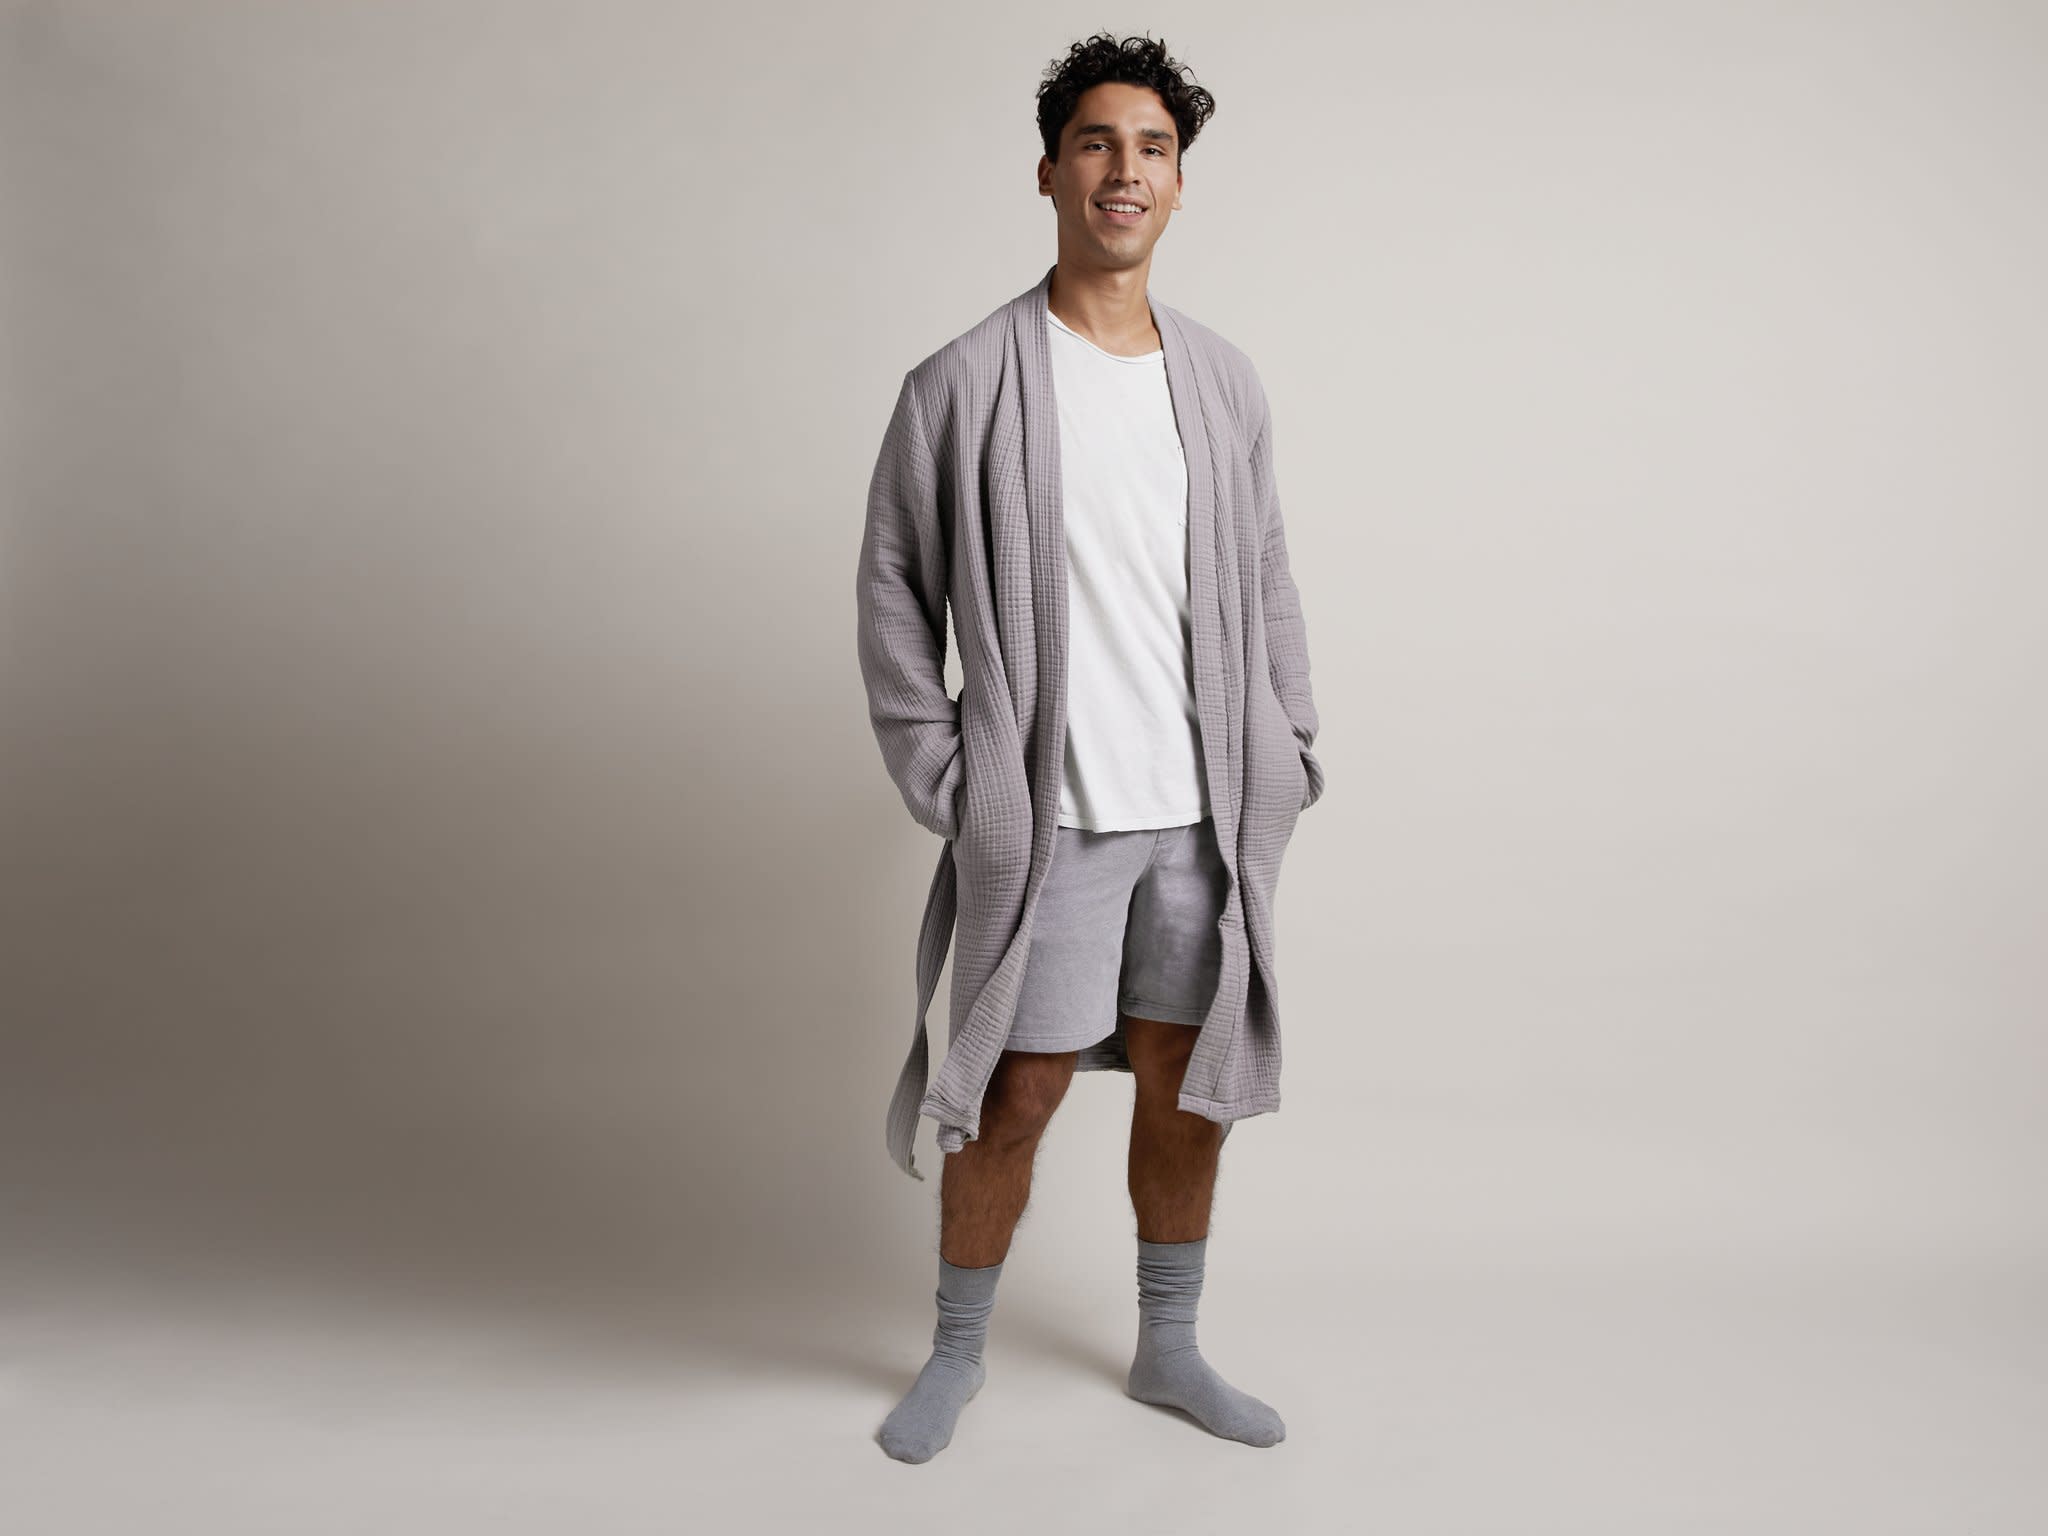 Grey Cloud Cotton Robe Shown In A Room